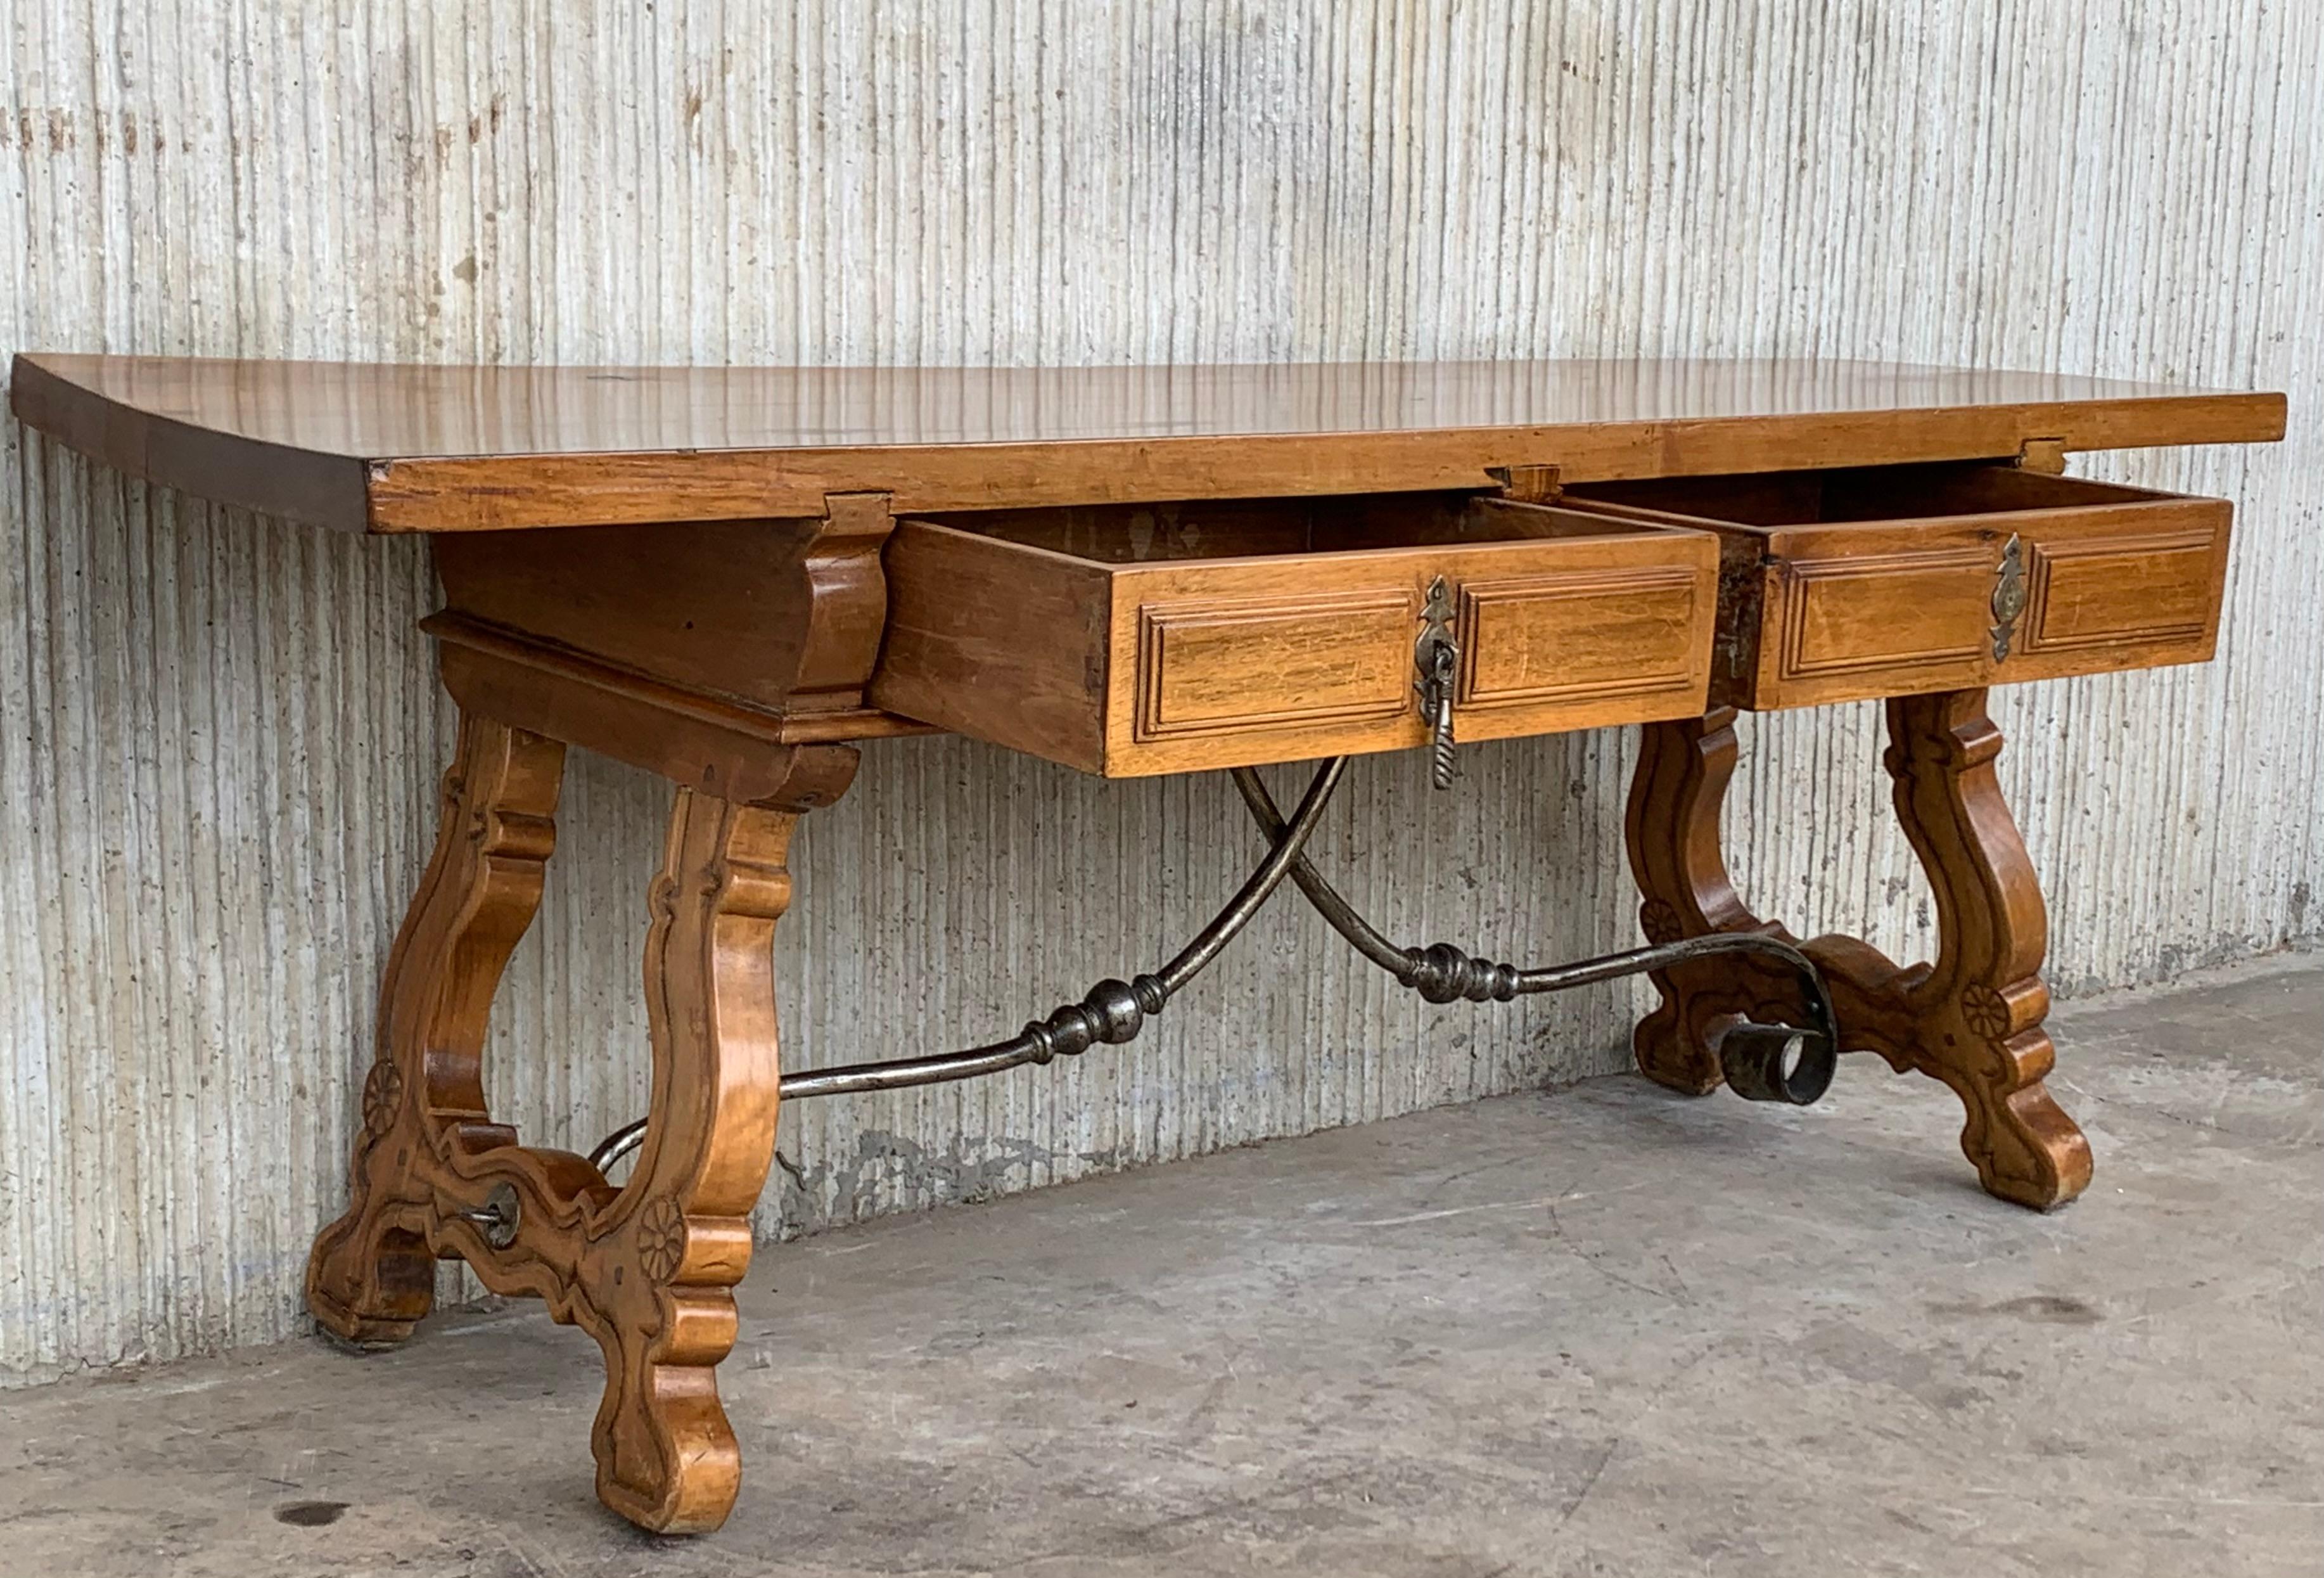 19th Century Spanish Bench or Low Console Table with Drawers, Lyre Legs and Iron Stretcher For Sale